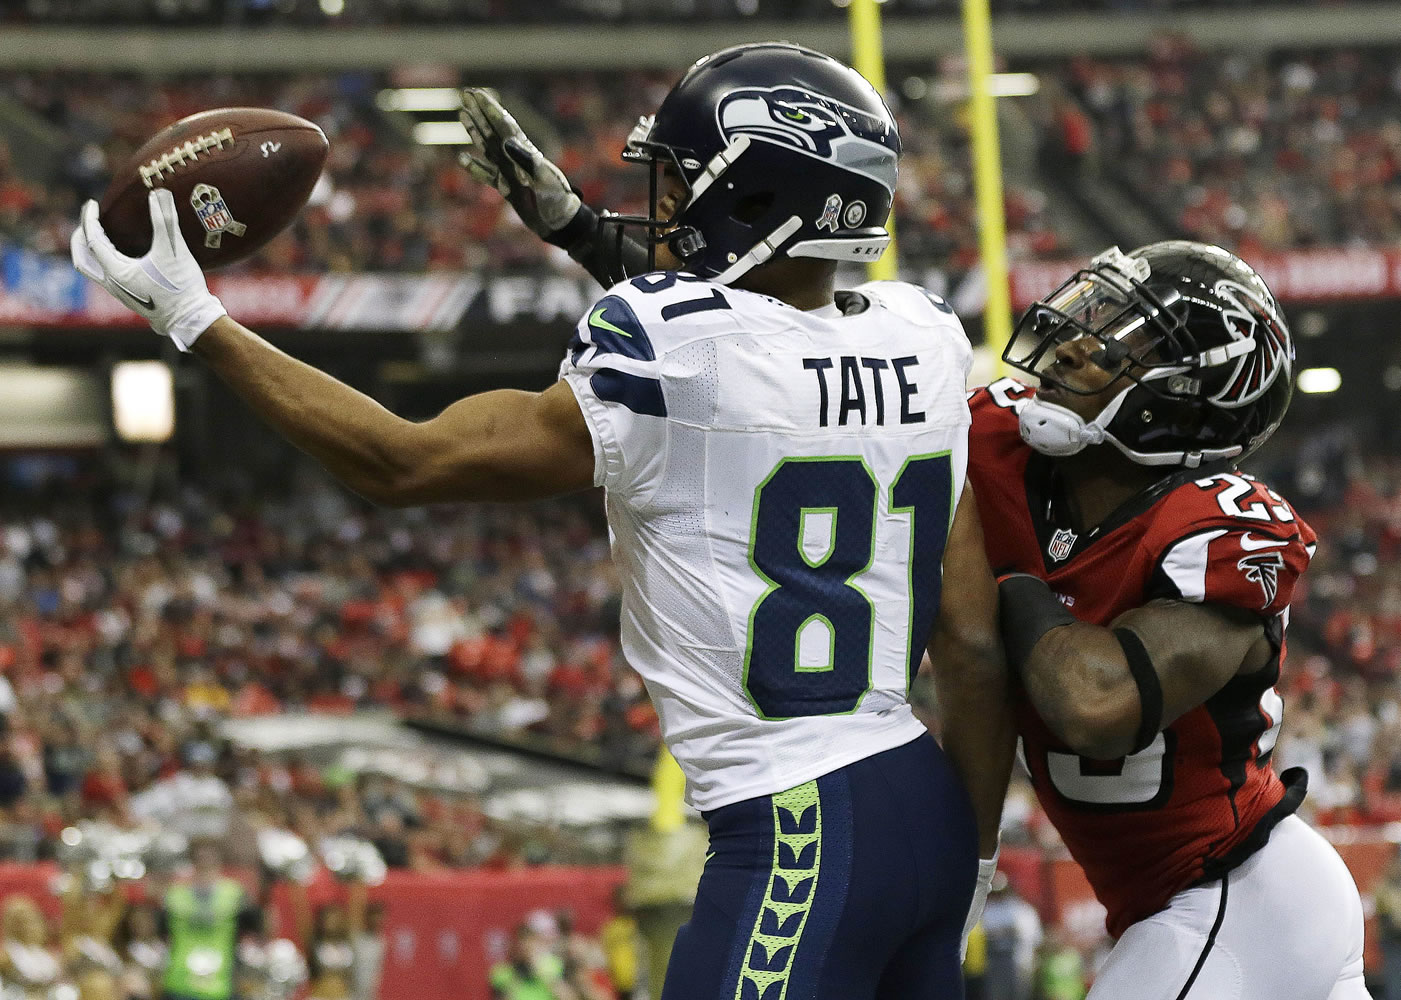 Seattle Seahawks wide receiver Golden Tate (81) makes a touchdown catch against Atlanta Falcons cornerback Robert Alford (23) in the closing seconds of the second quarter Sunday. Replay review confirmed the touchdown.